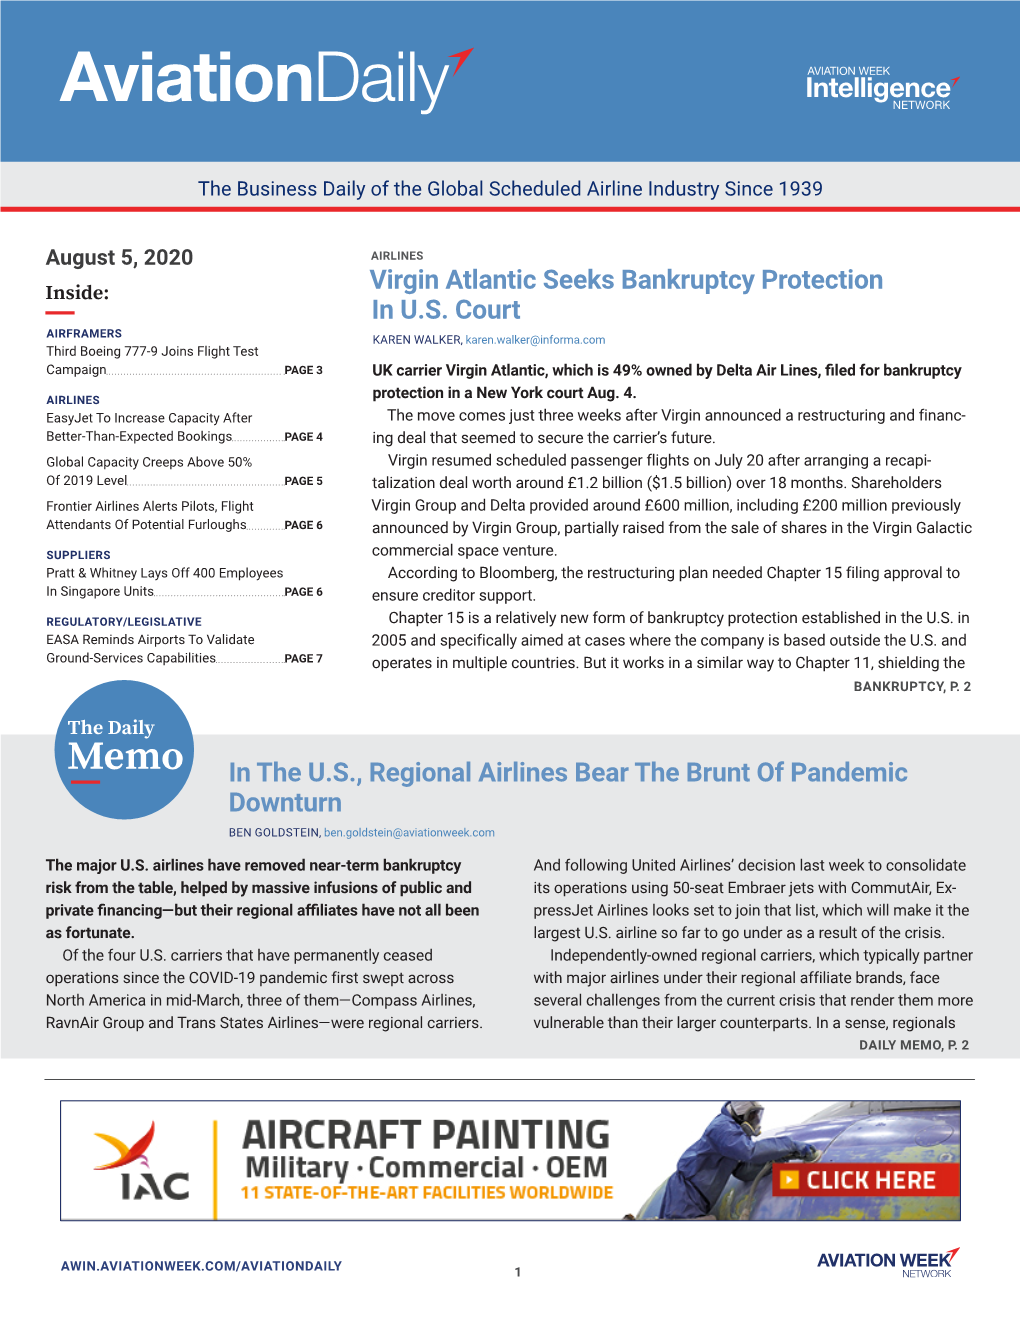 Aviation Week Aviation Daily, Wednesday, August 5, 2020